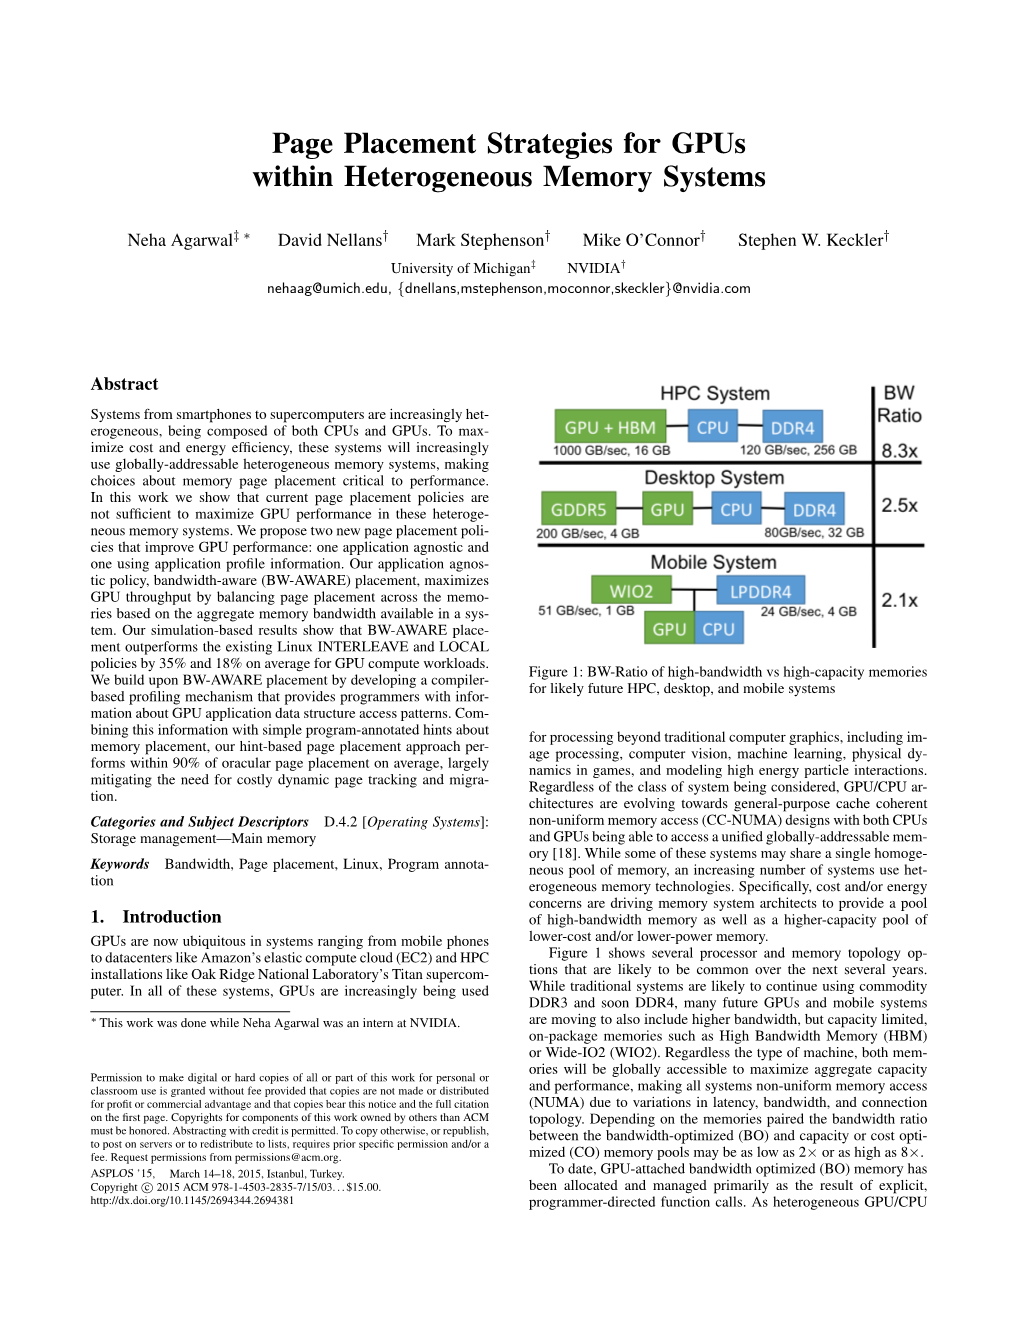 Page Placement Strategies for Gpus Within Heterogeneous Memory Systems